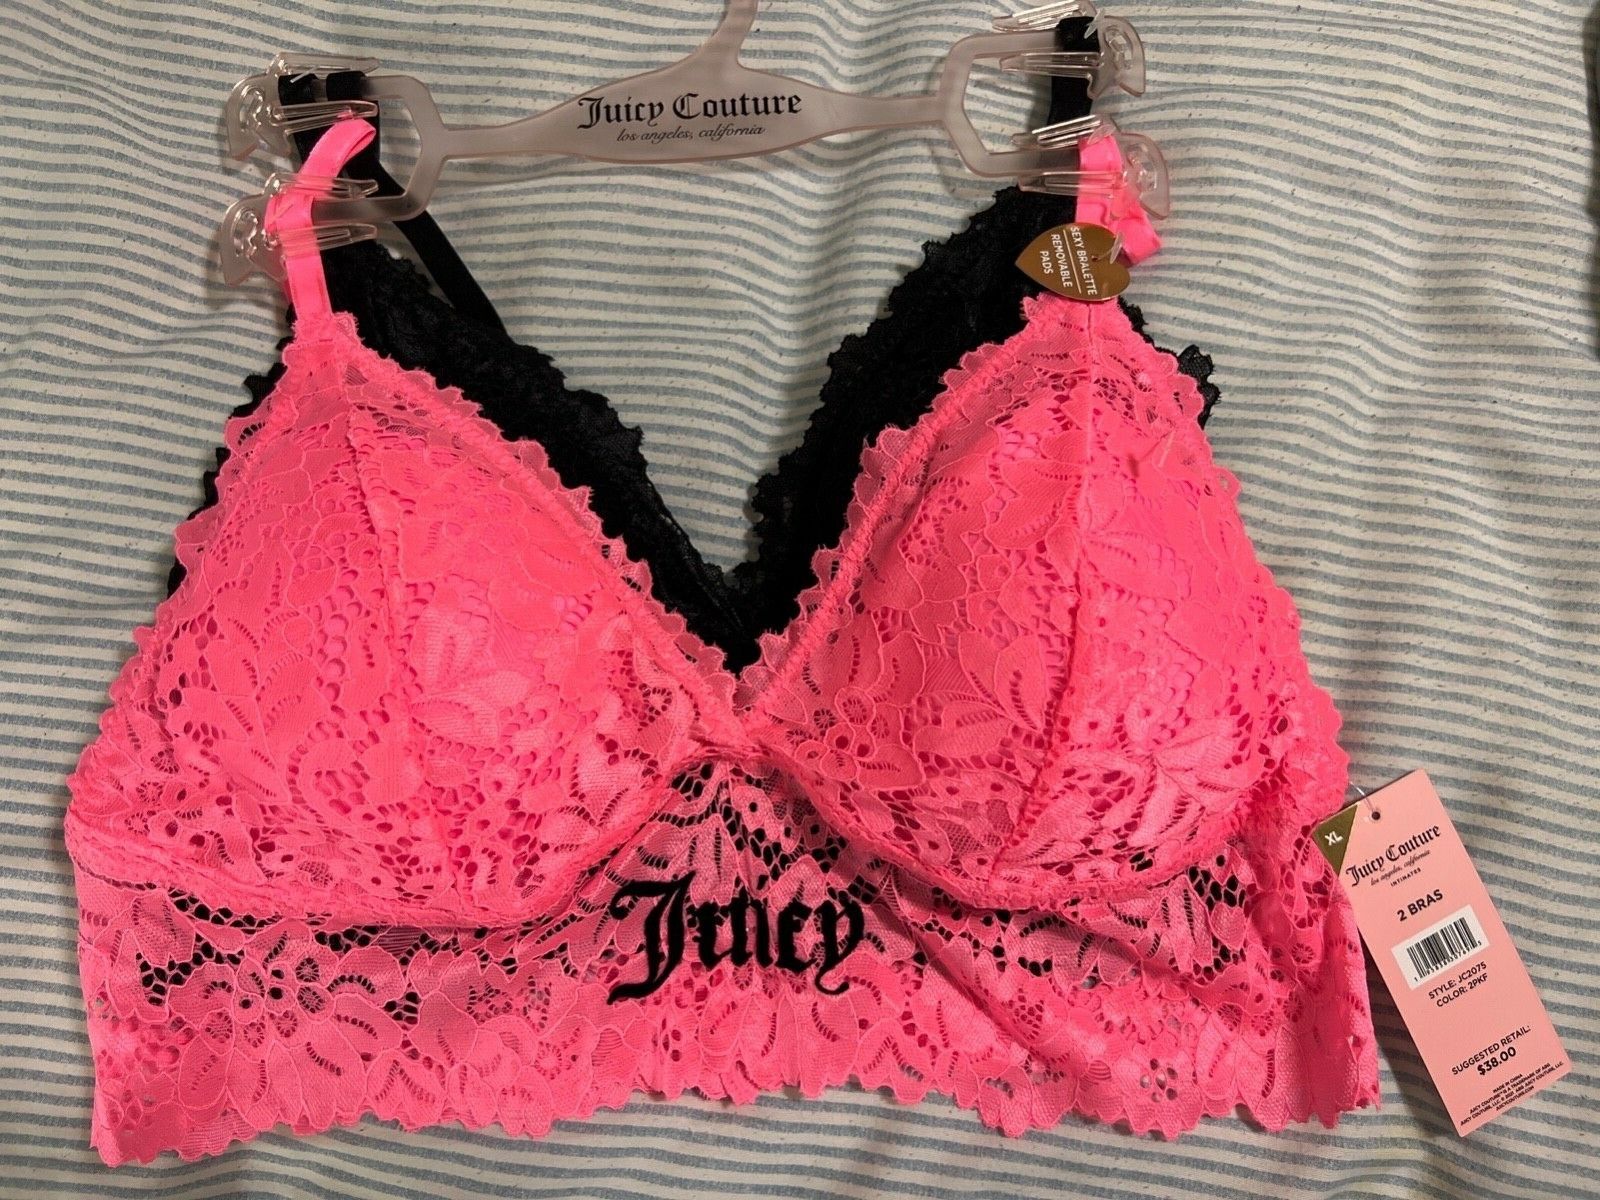 Juicy Couture size XL Lace Bralette 2Pack Black & Pink Bra with Logo